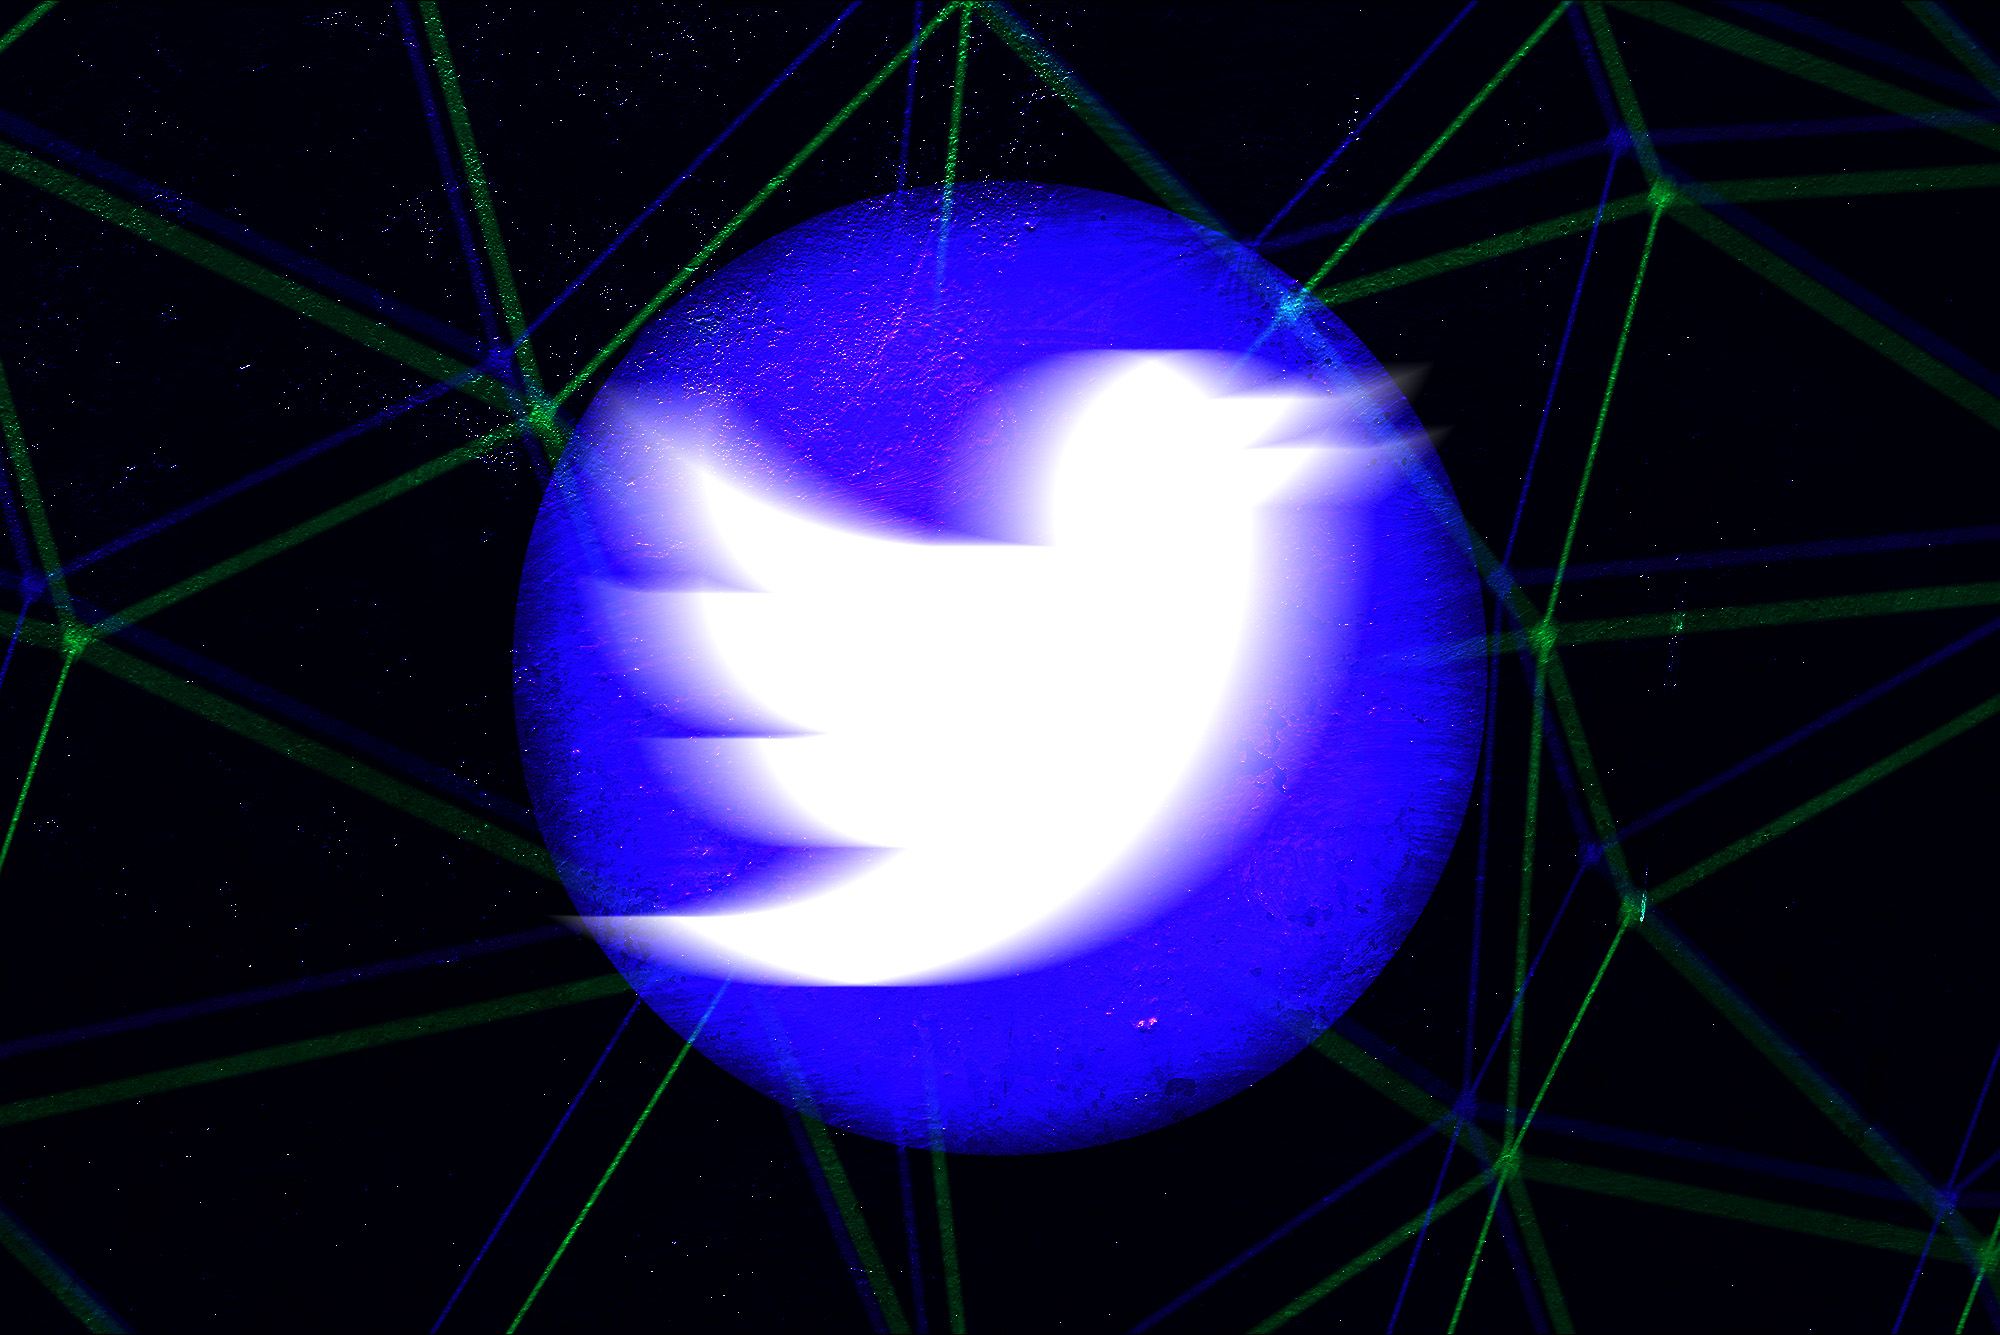 Twitter to revamp verified accounts with a new label